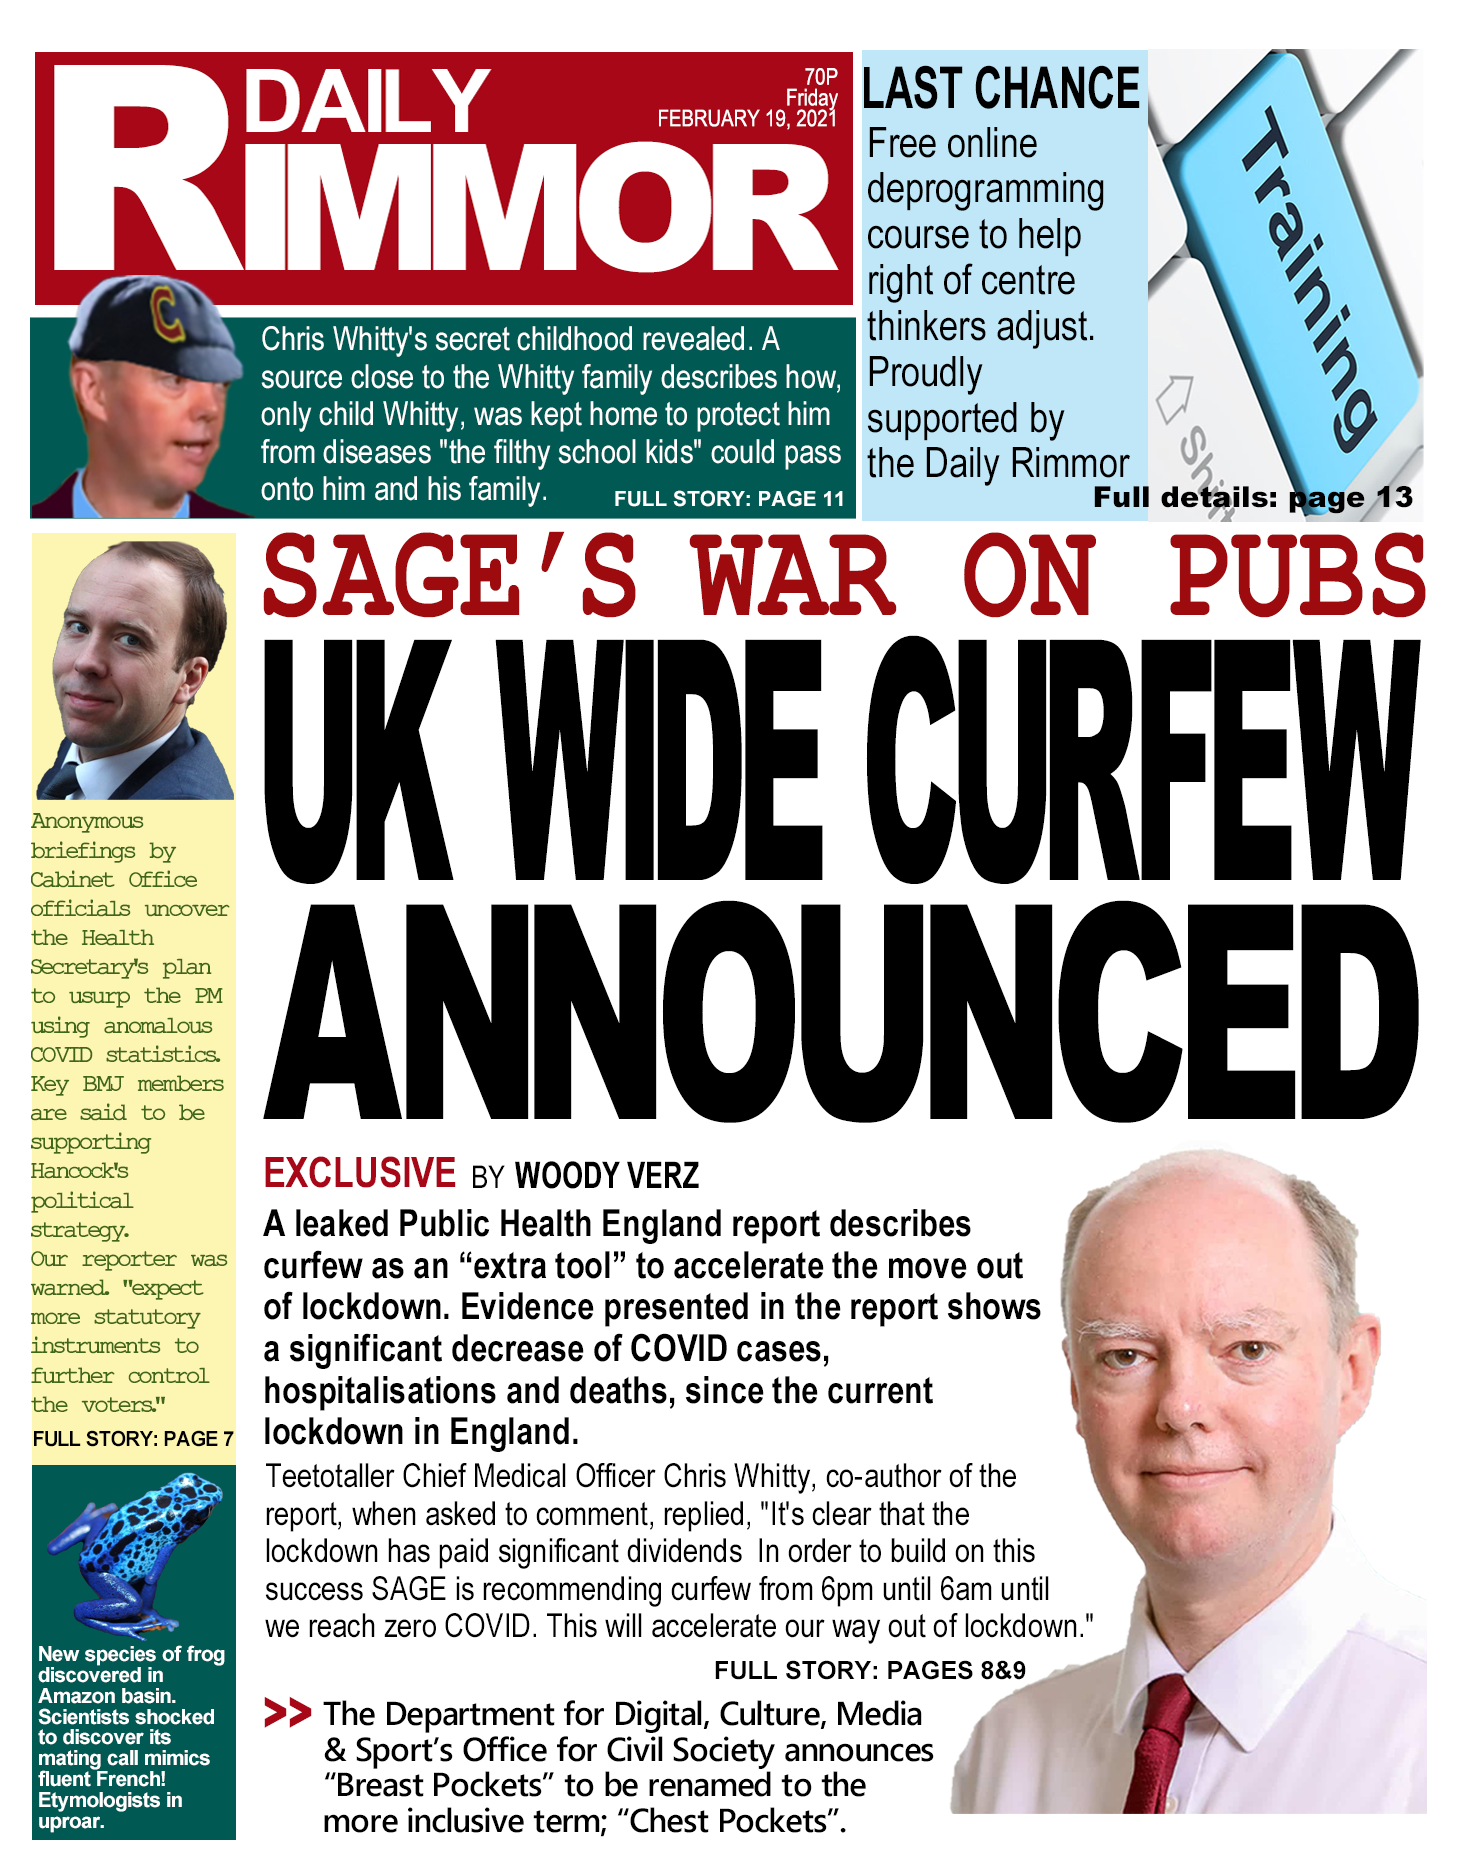 Daily Rimmor front page. COVID-19, Friday 19 February